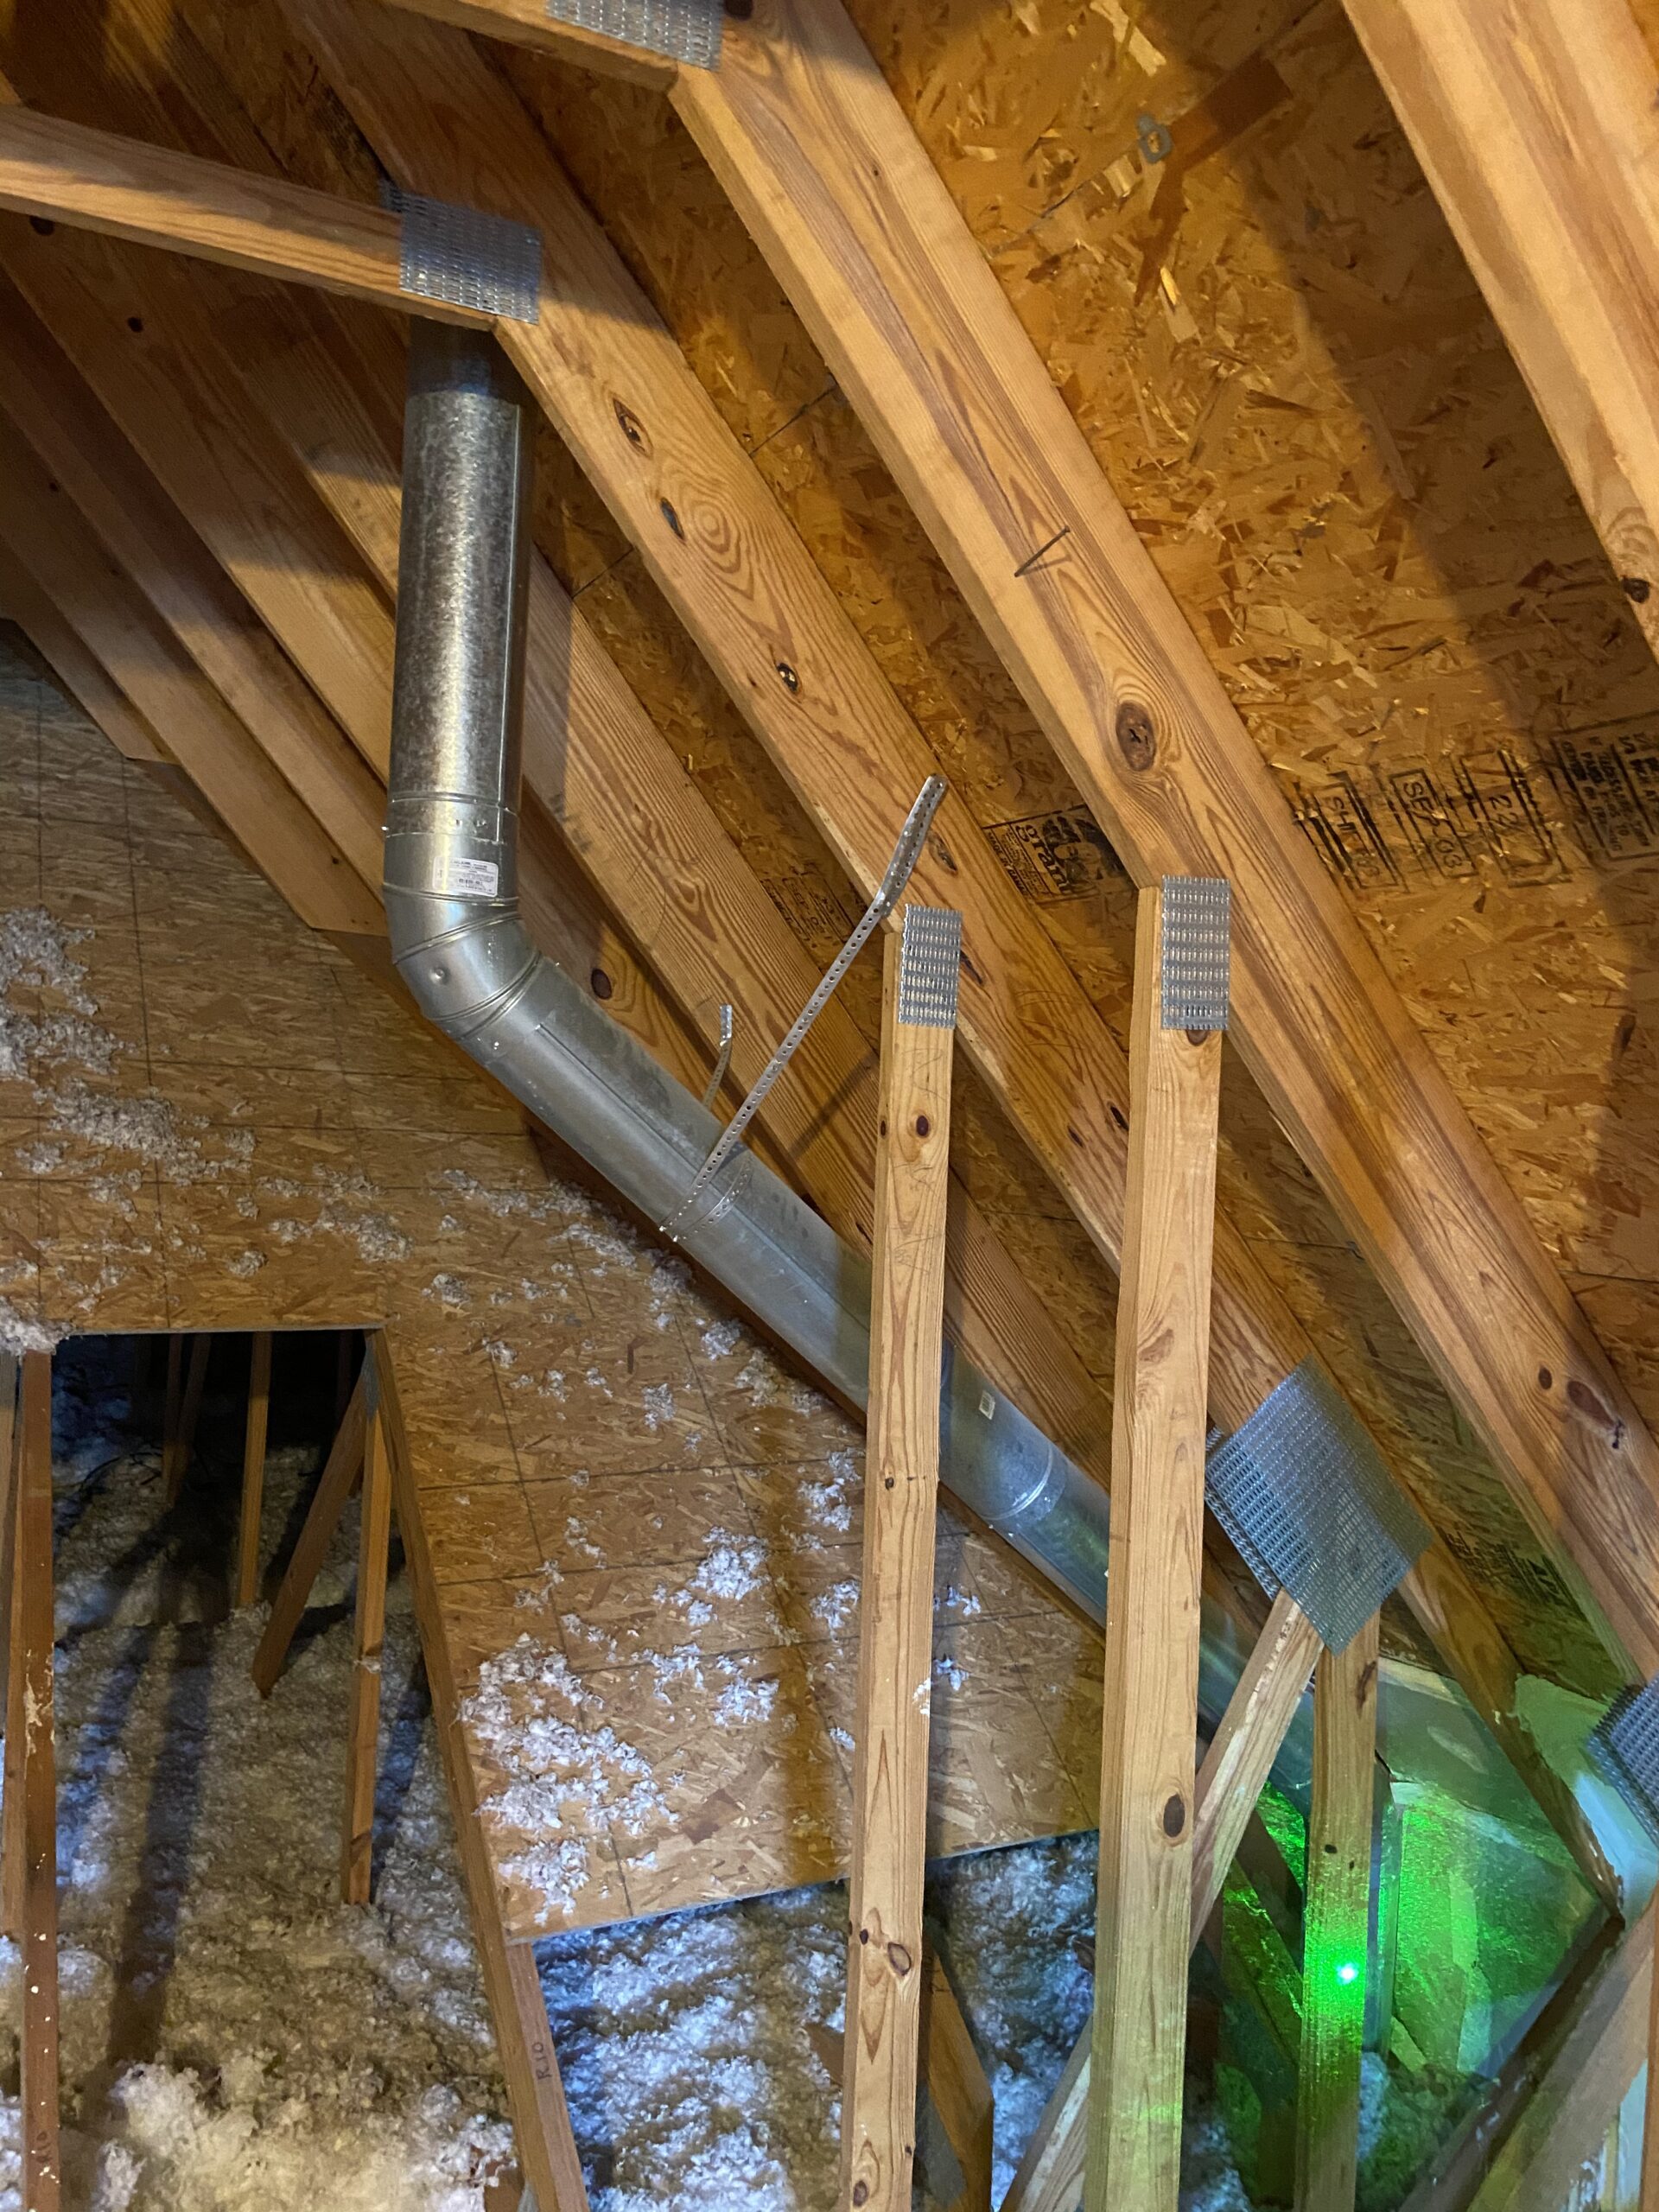 This is a picture of a pipe that might be causing a roof leak